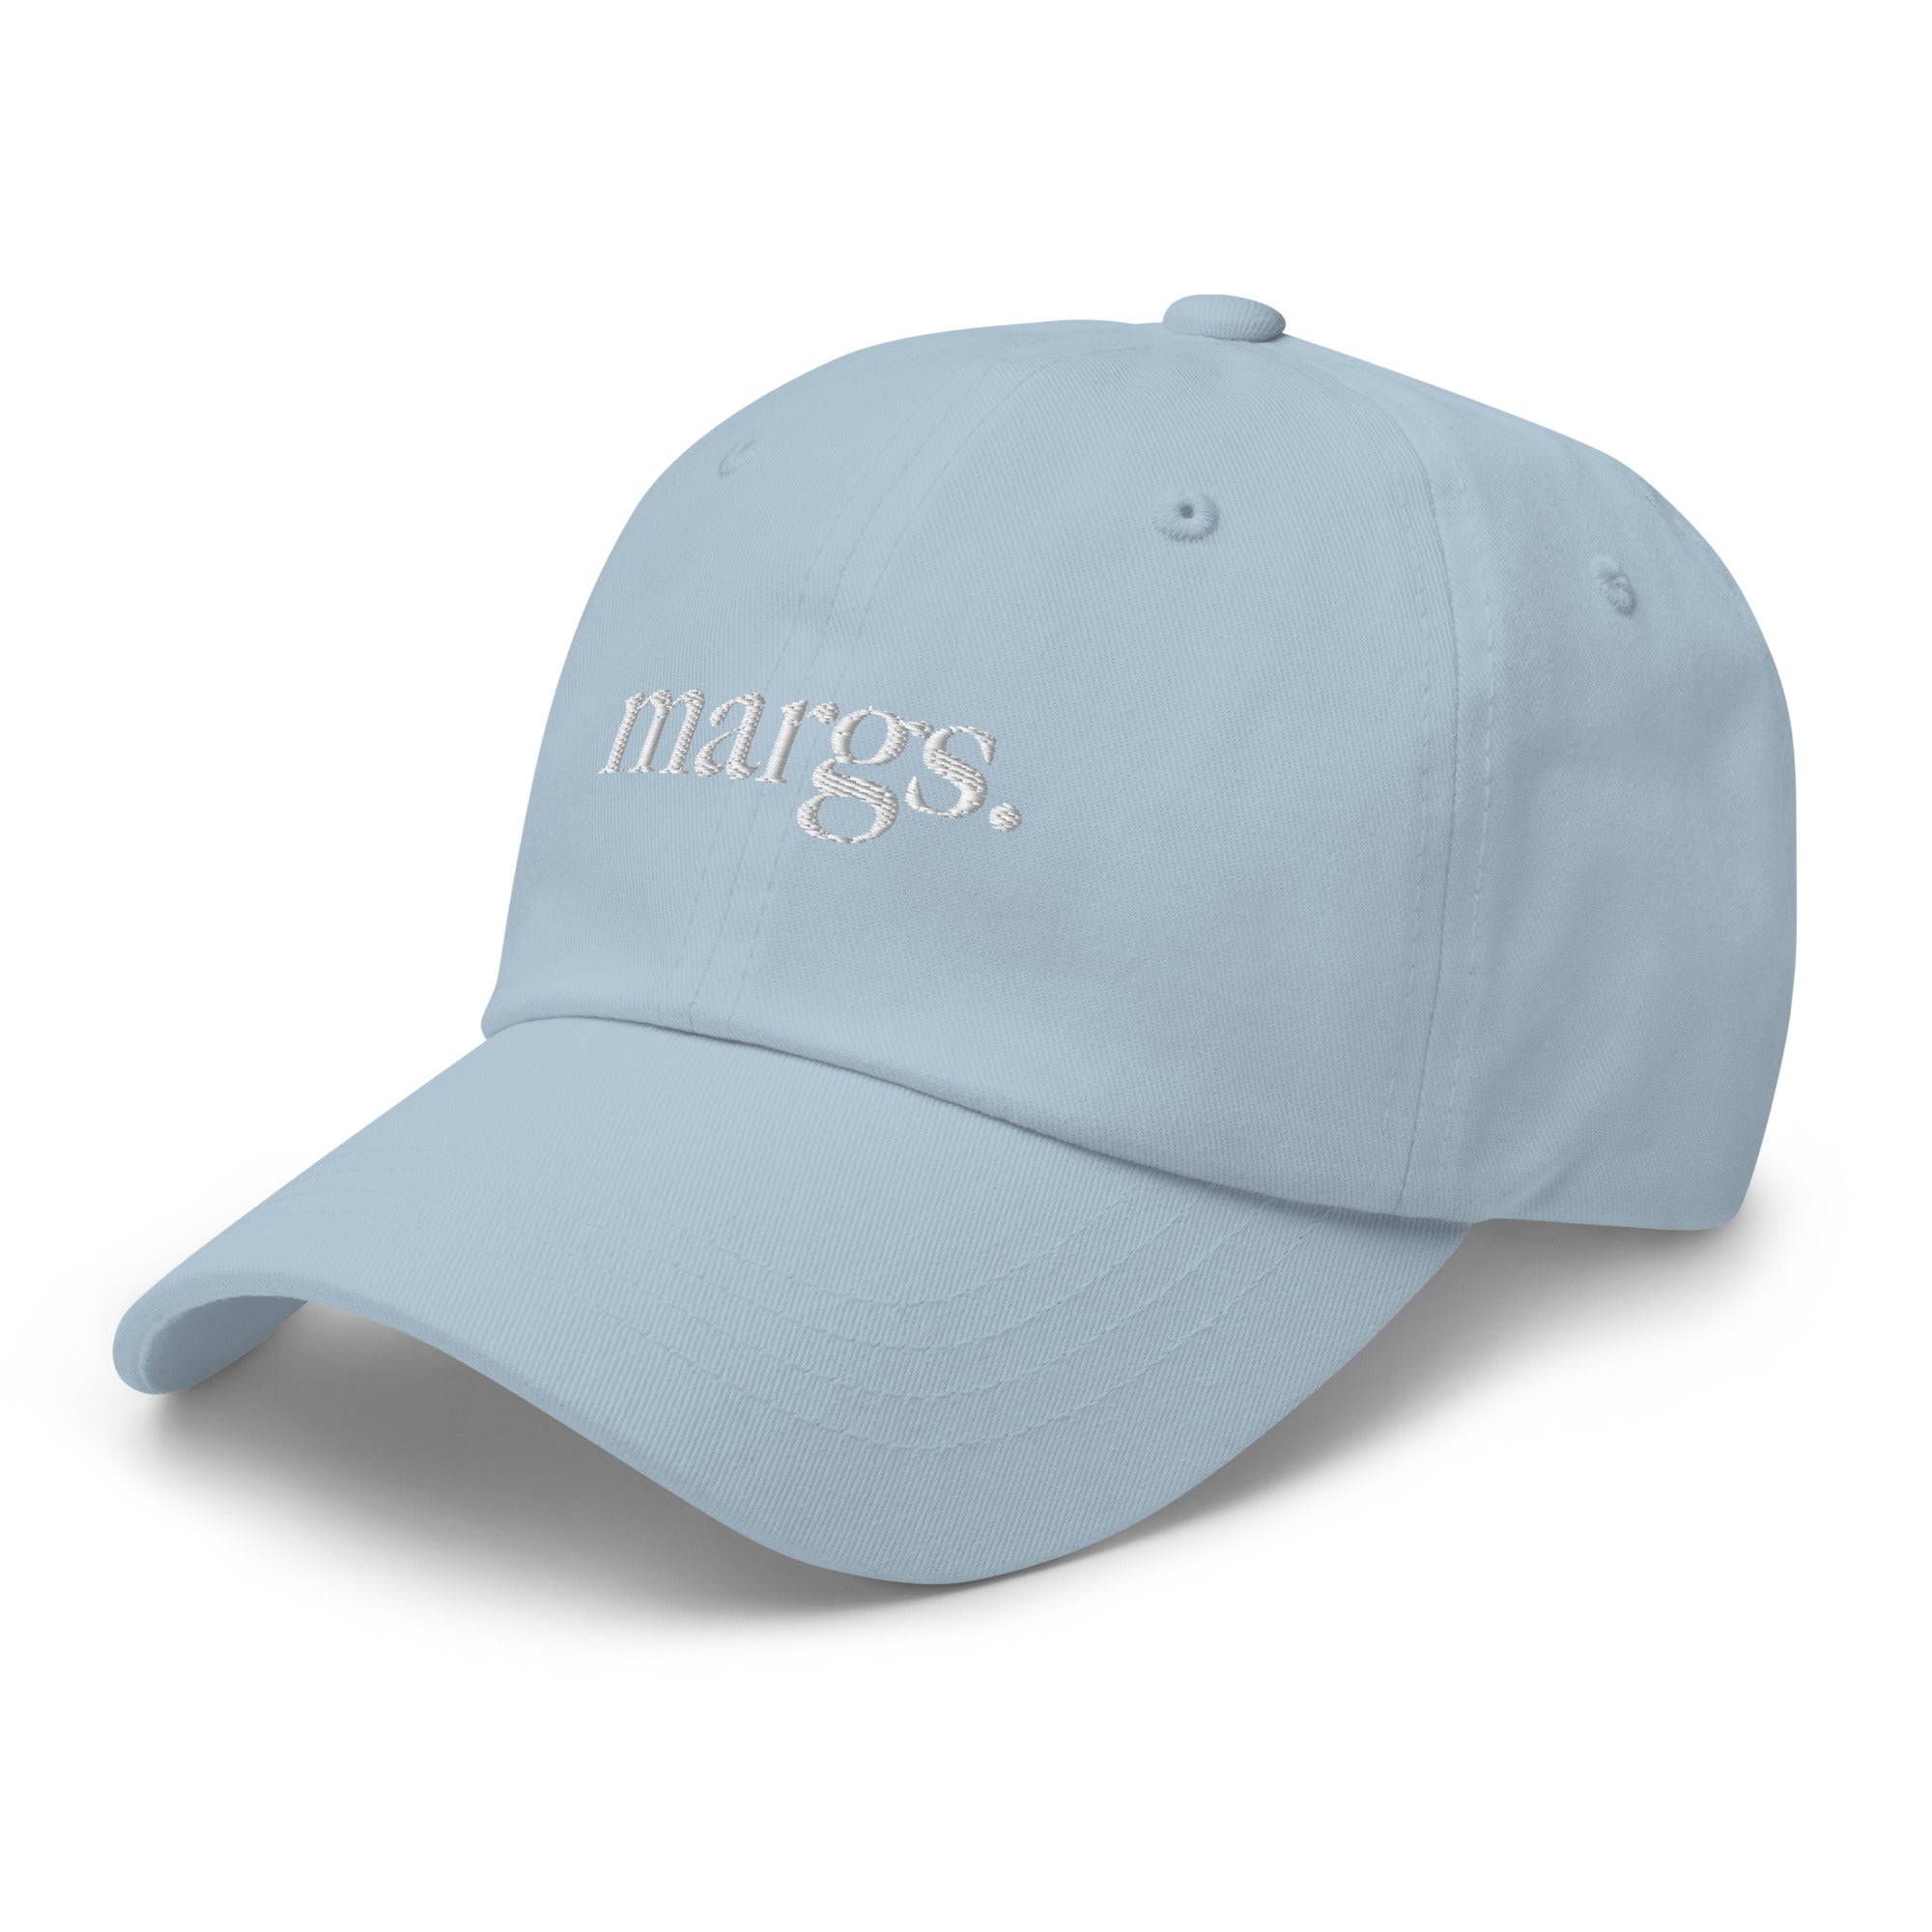 Margs. Dad hat